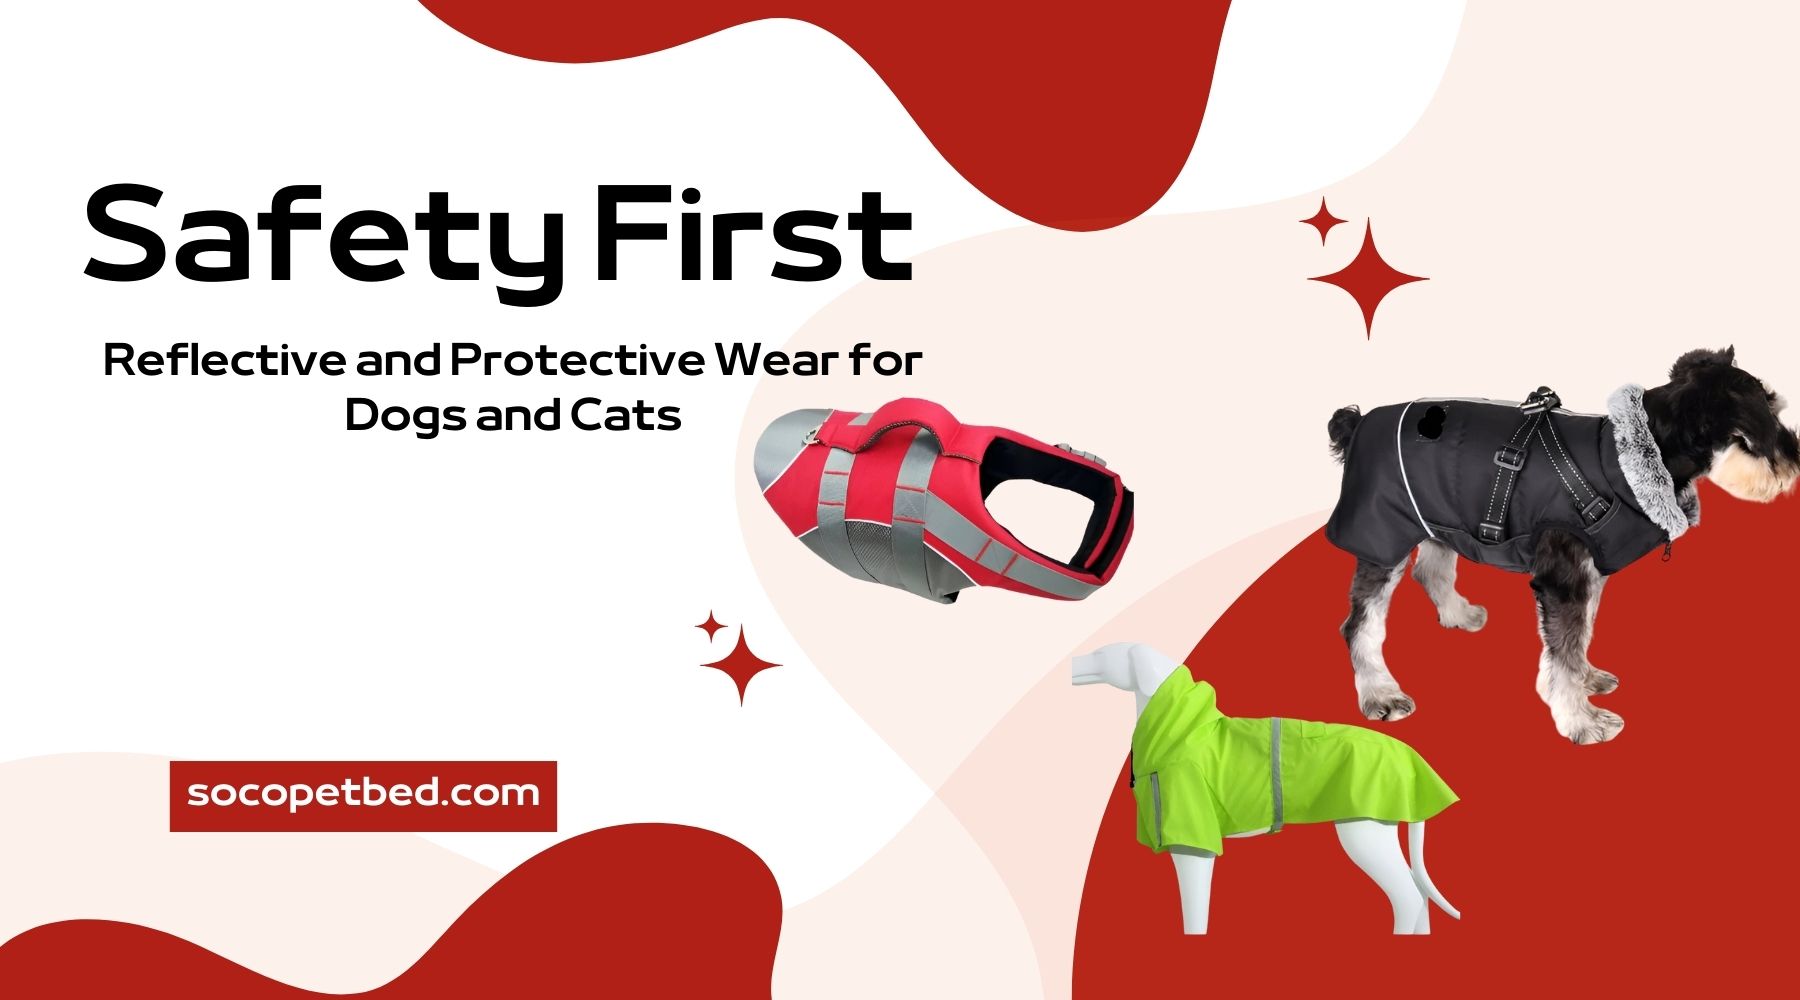 Safety First: Reflective and Protective Wear for Dogs and Cats